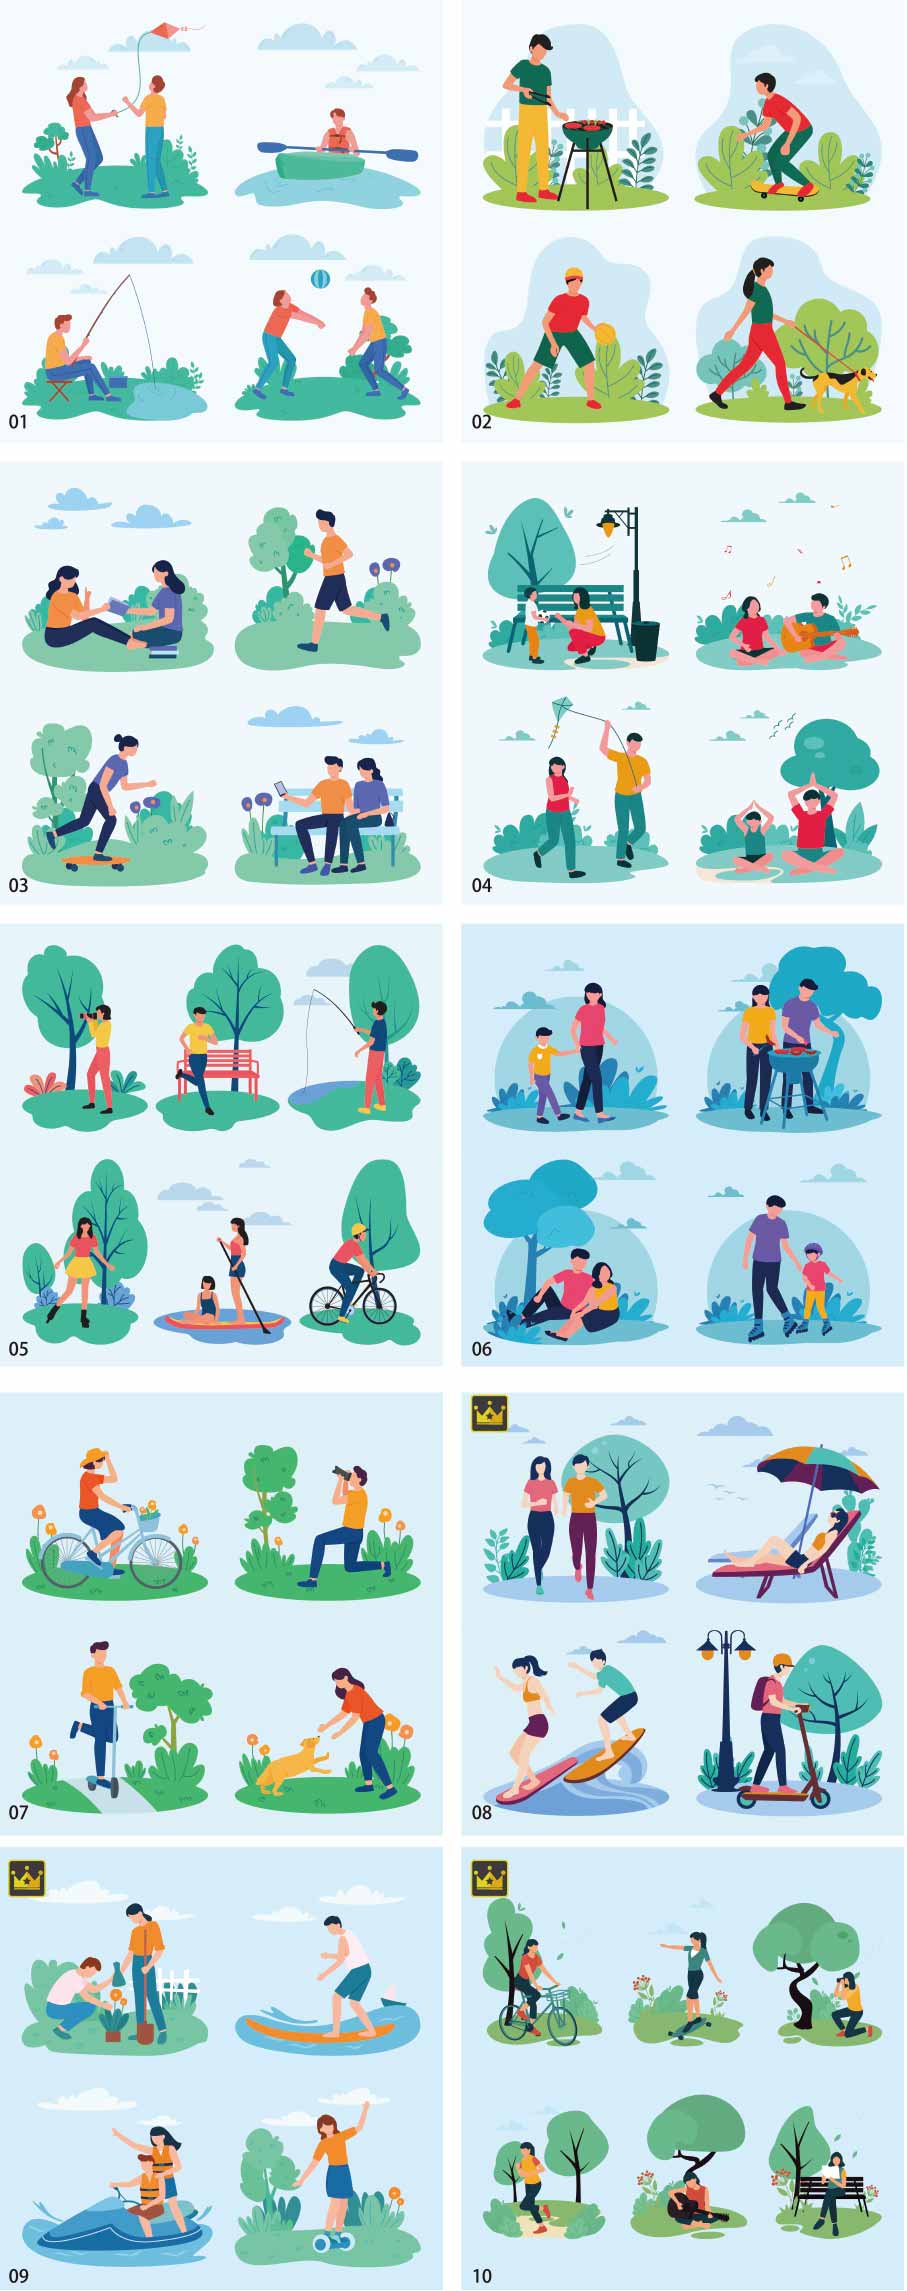 Outdoor activity illustration collection